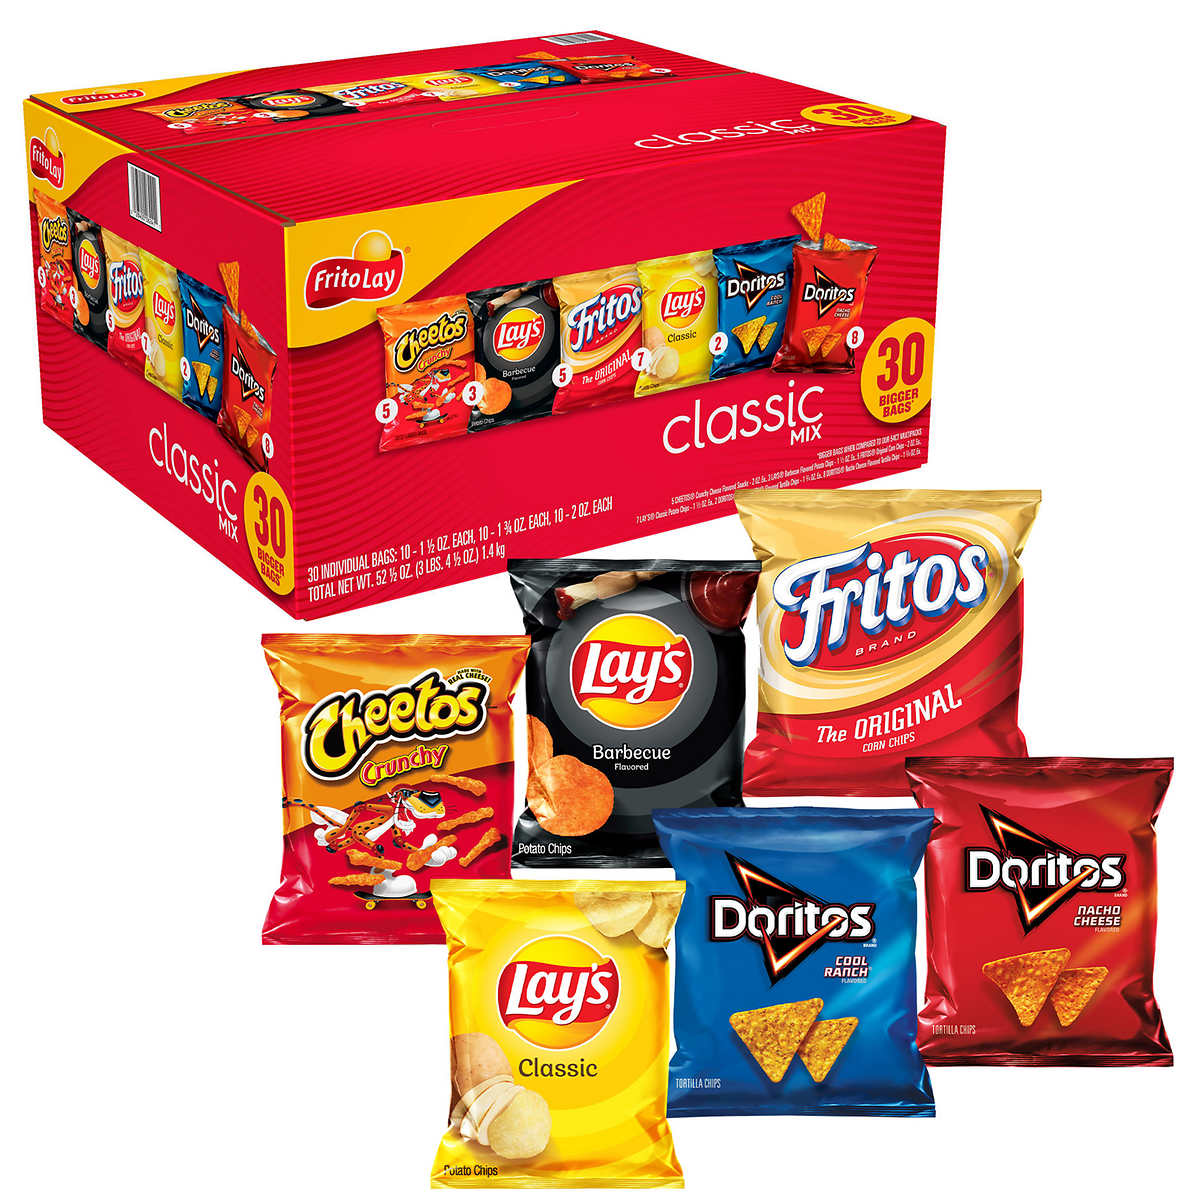  Frito-Lay Snacks Classic Mix Chips Variety Pack